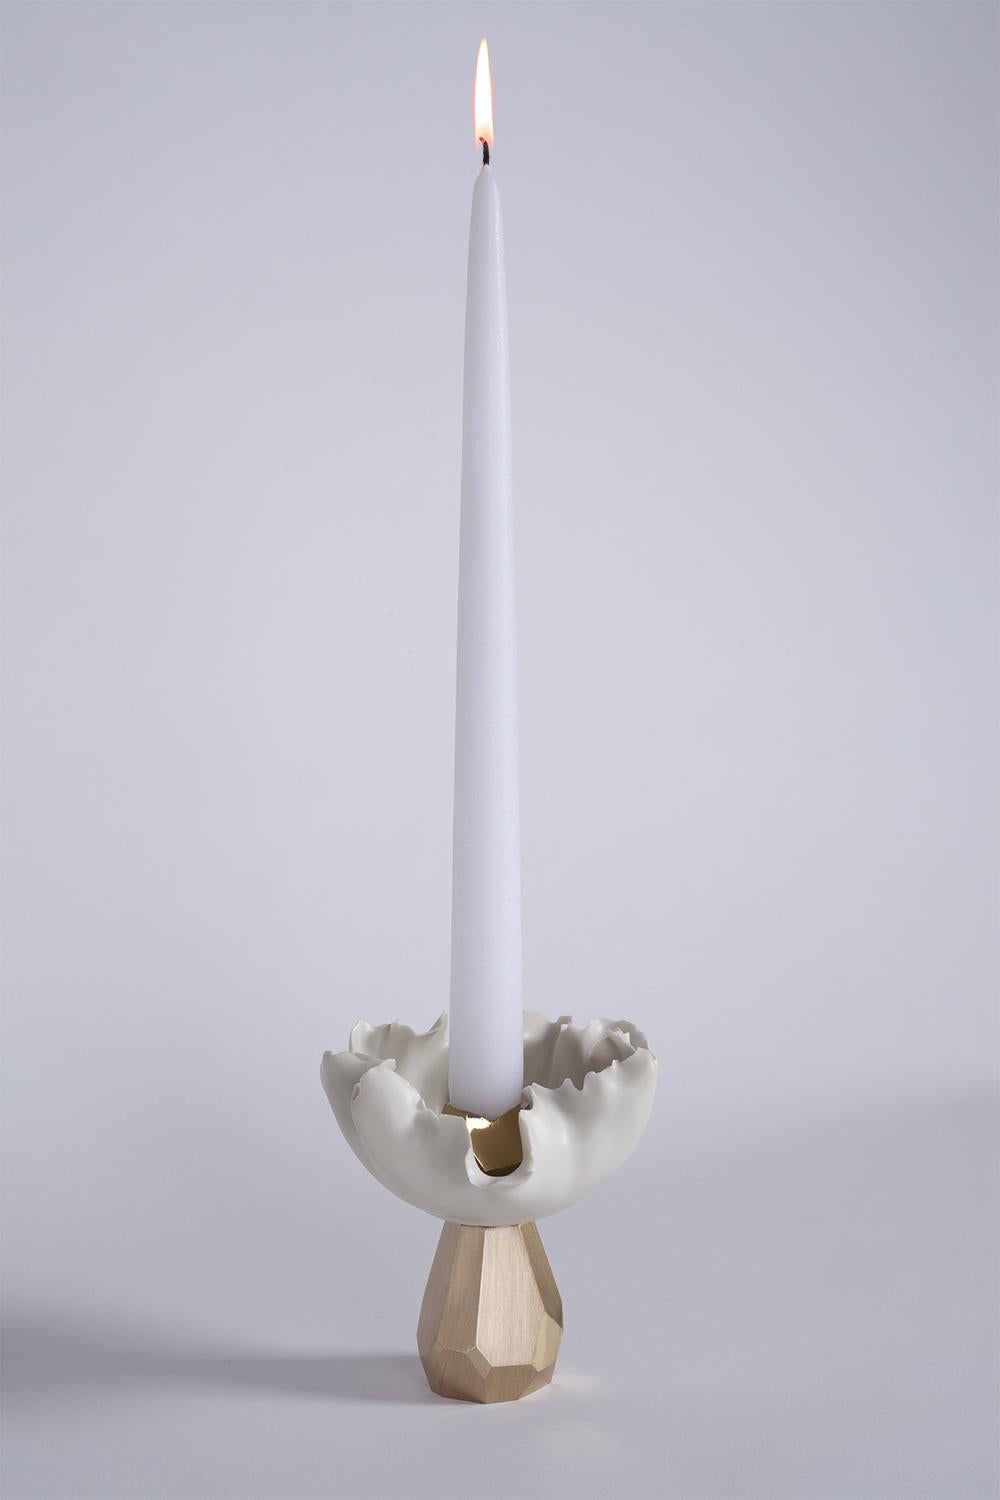 This pair of candlesticks embodies the union between
the delicacy of porcelain and the strength of brass.
The modelled porcelain takes the form of a floral collar evoking the grace and elegance of nature.
The brass adds a touch of sophistication and